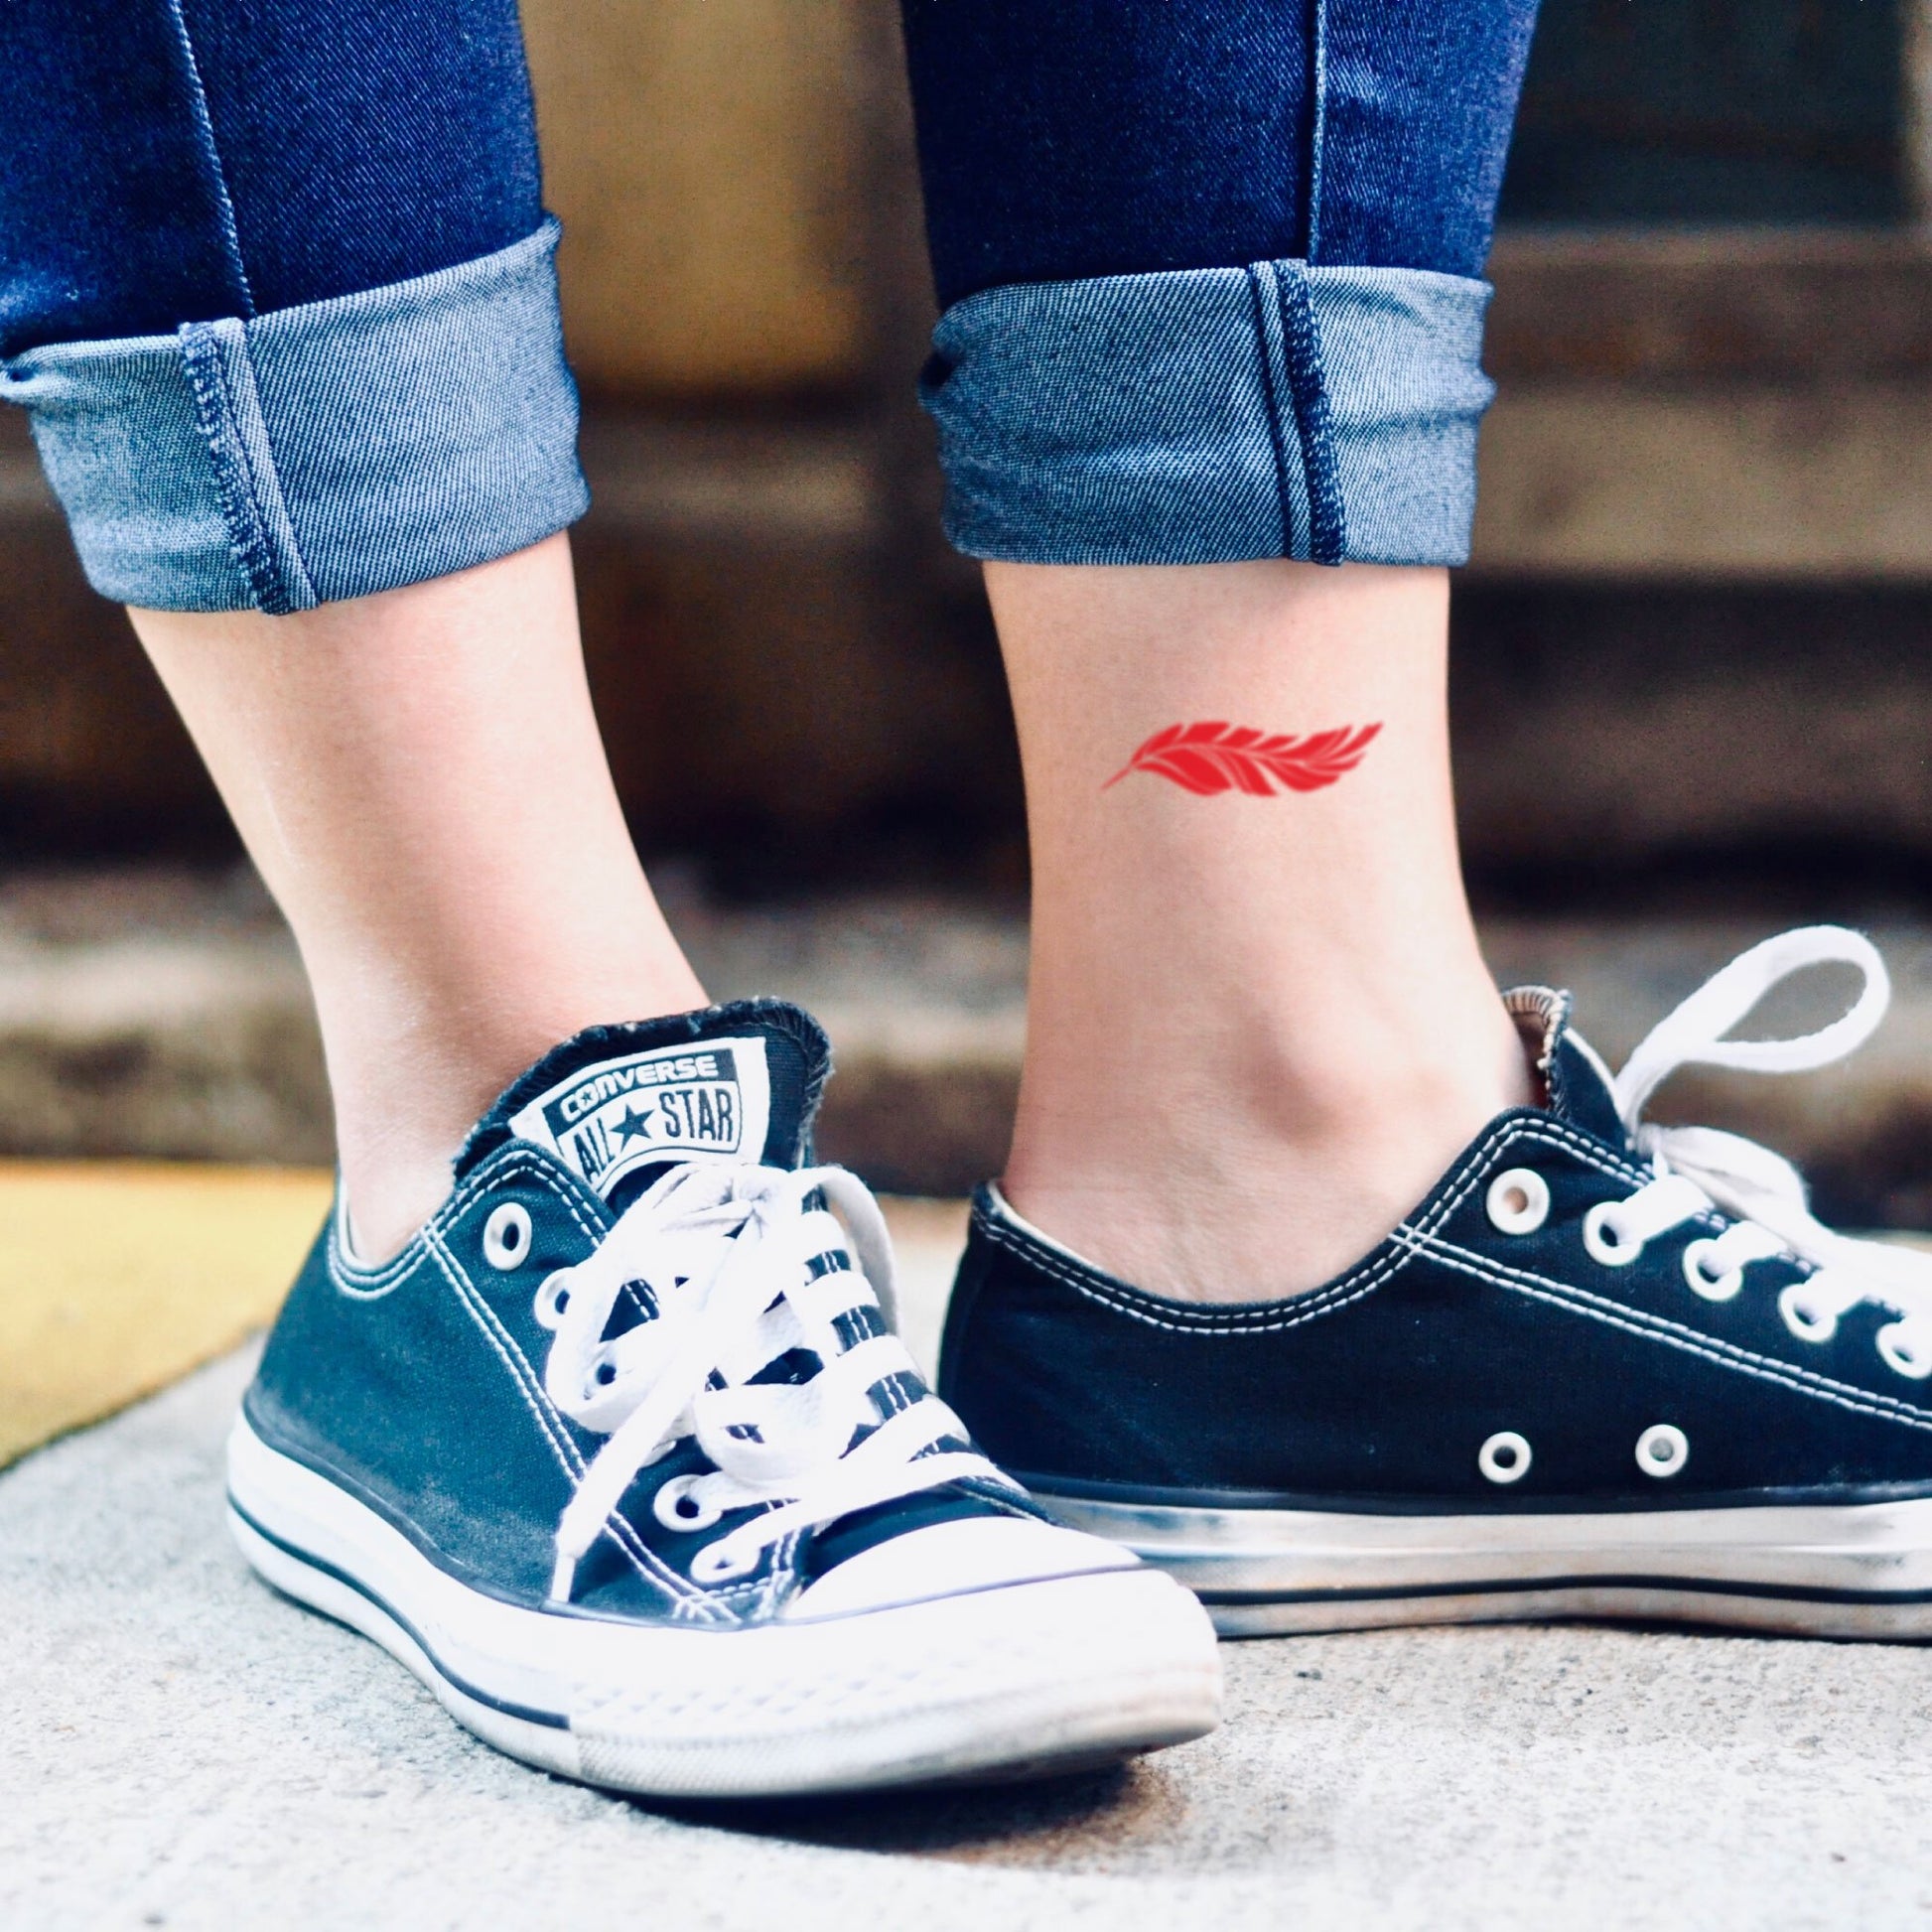 fake small red feather color temporary tattoo sticker design idea on ankle